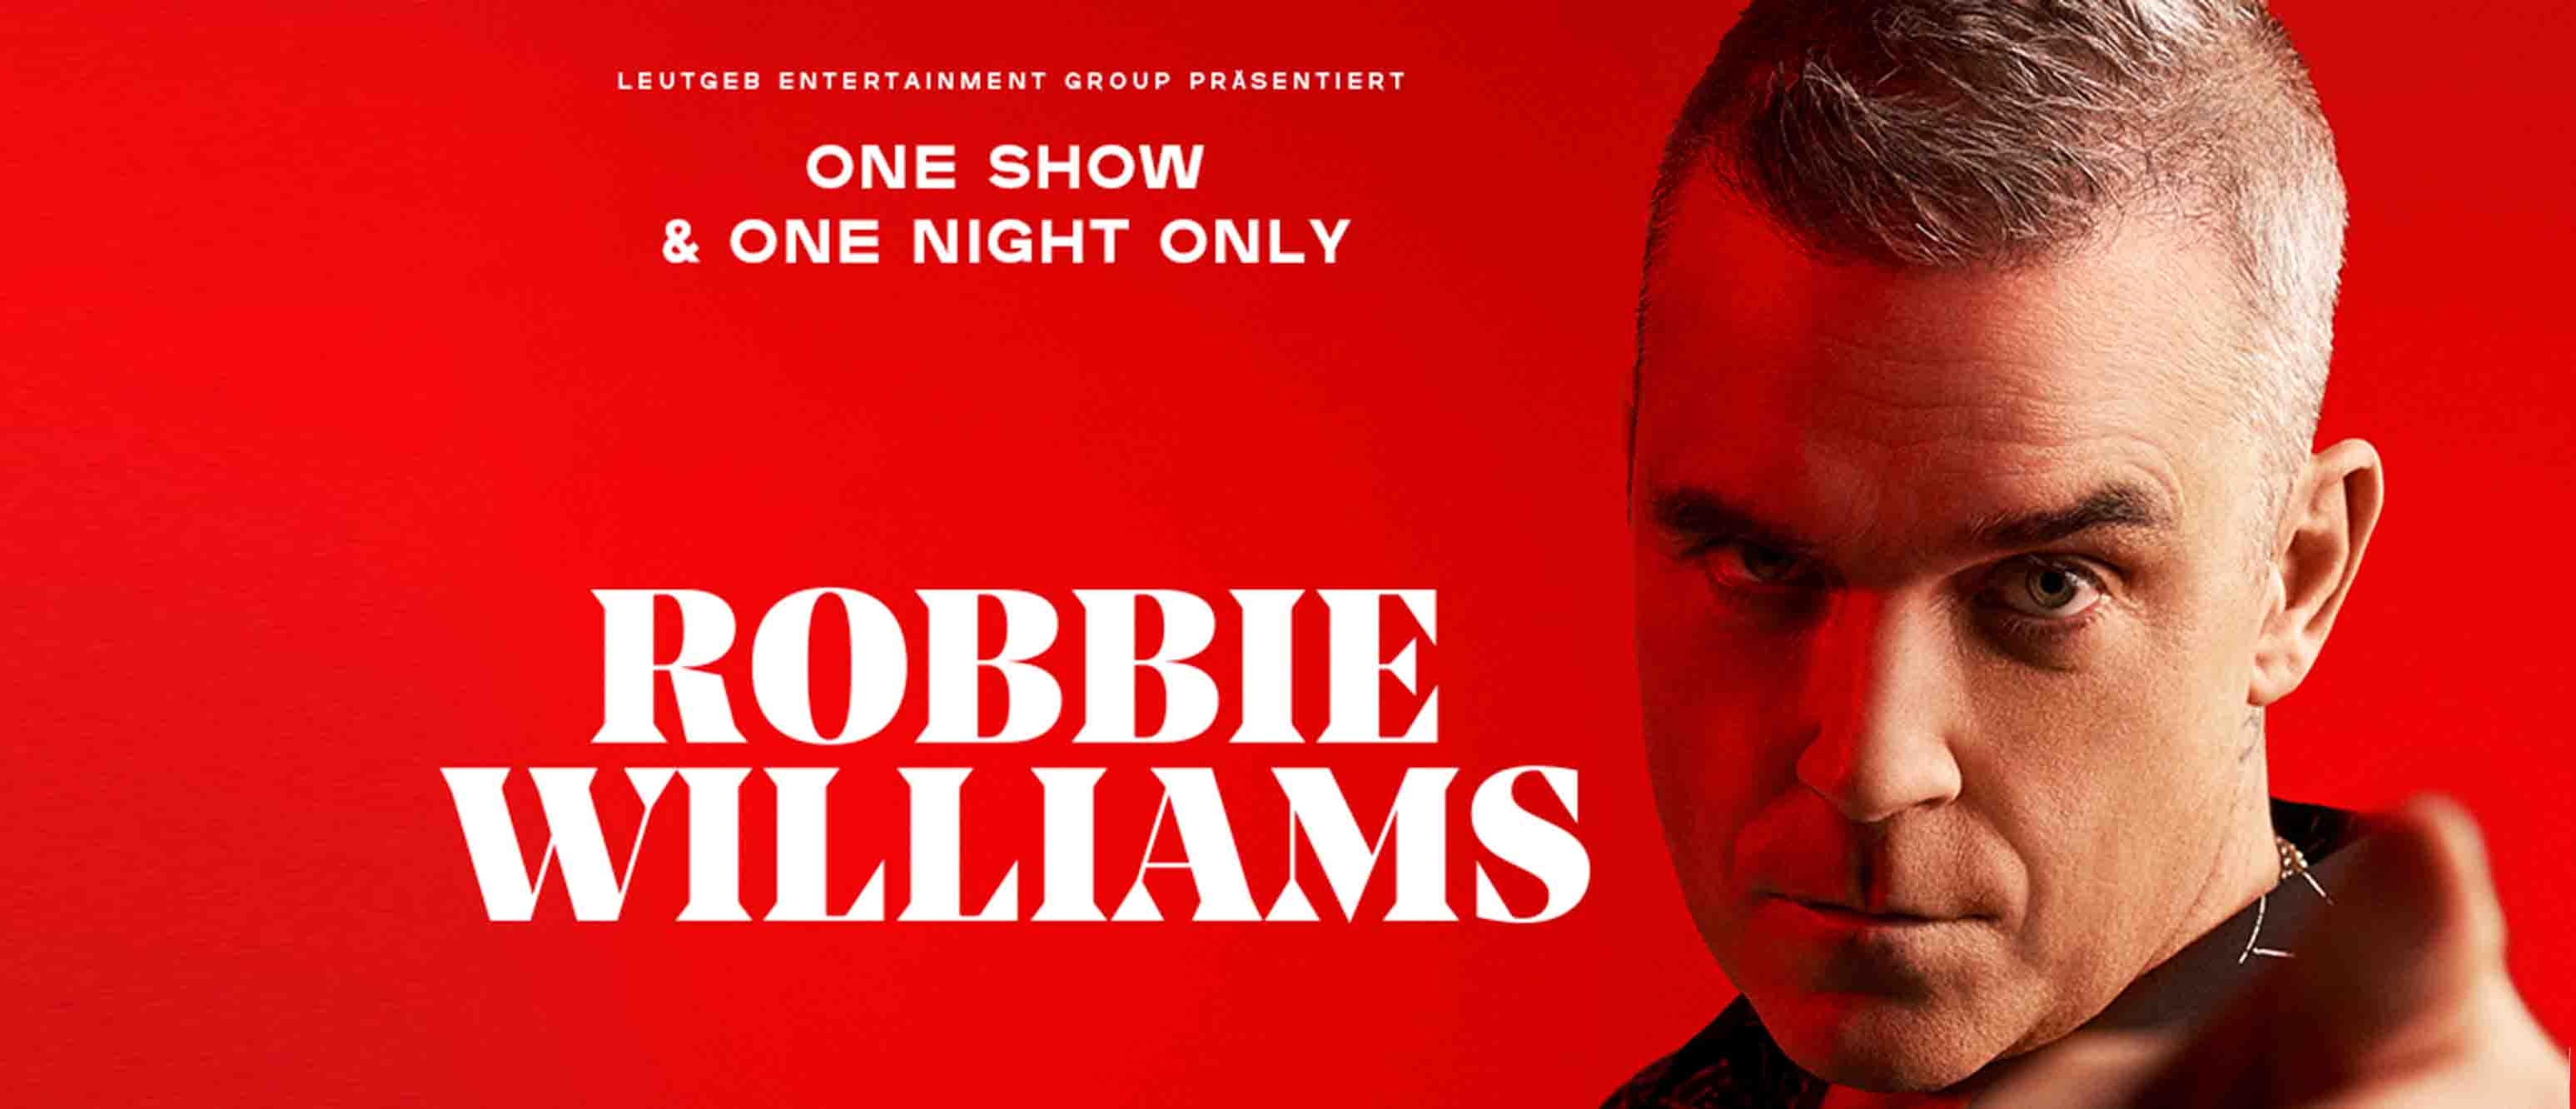 Robbie Williams - 3094 x 1332px © Giovanni Dominice-Ease Agency